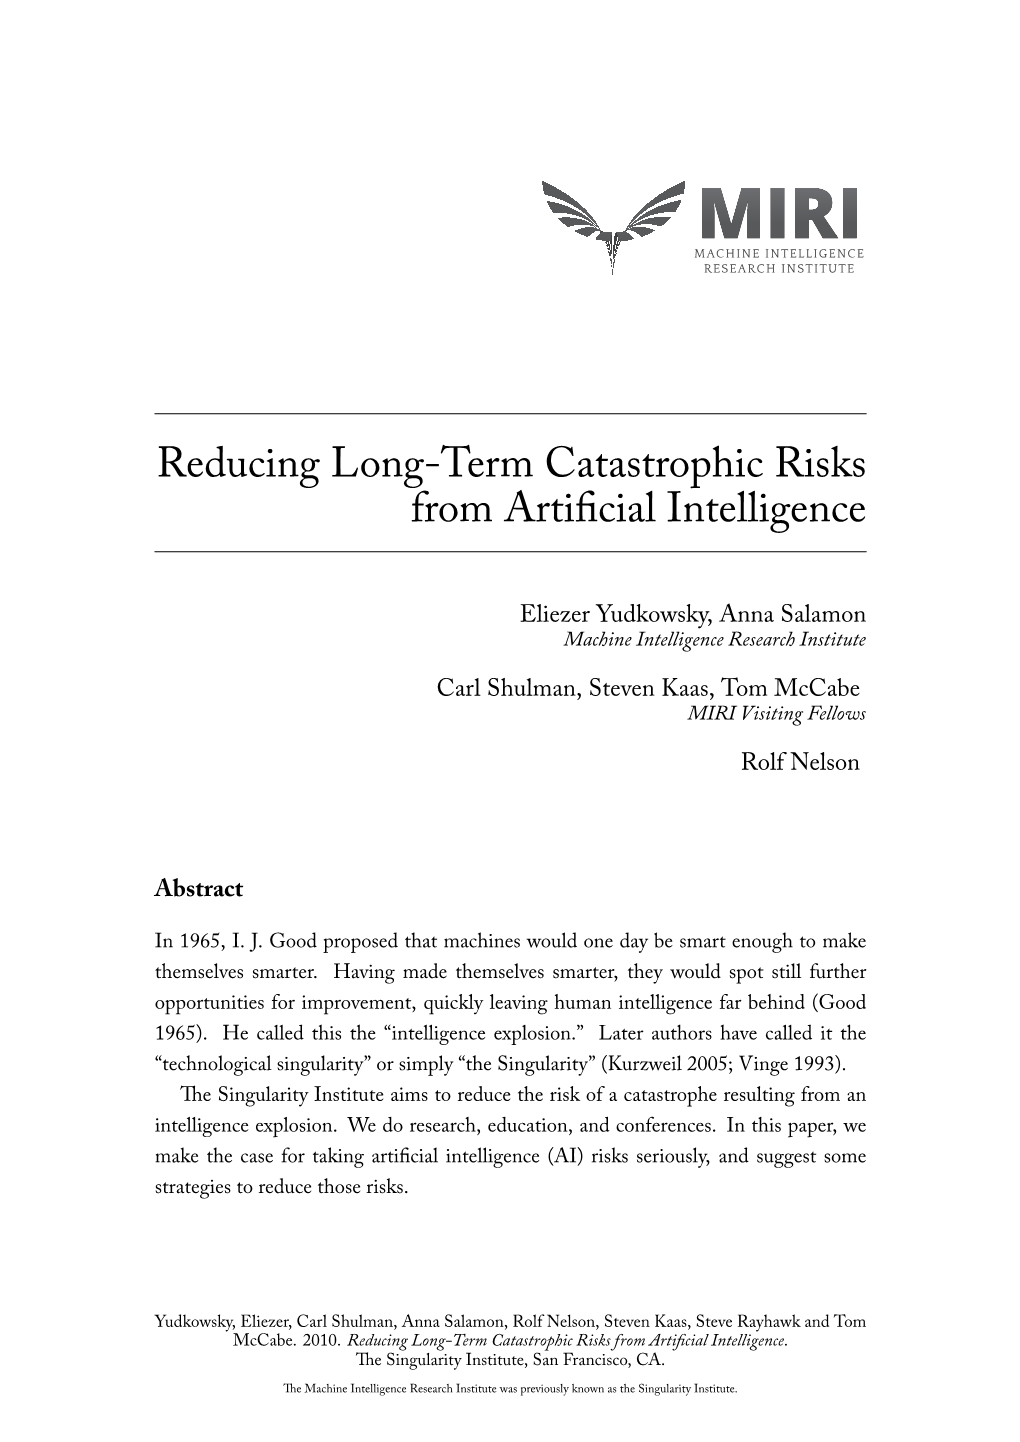 Reducing Long-Term Catastrophic Risks from Artificial Intelligence